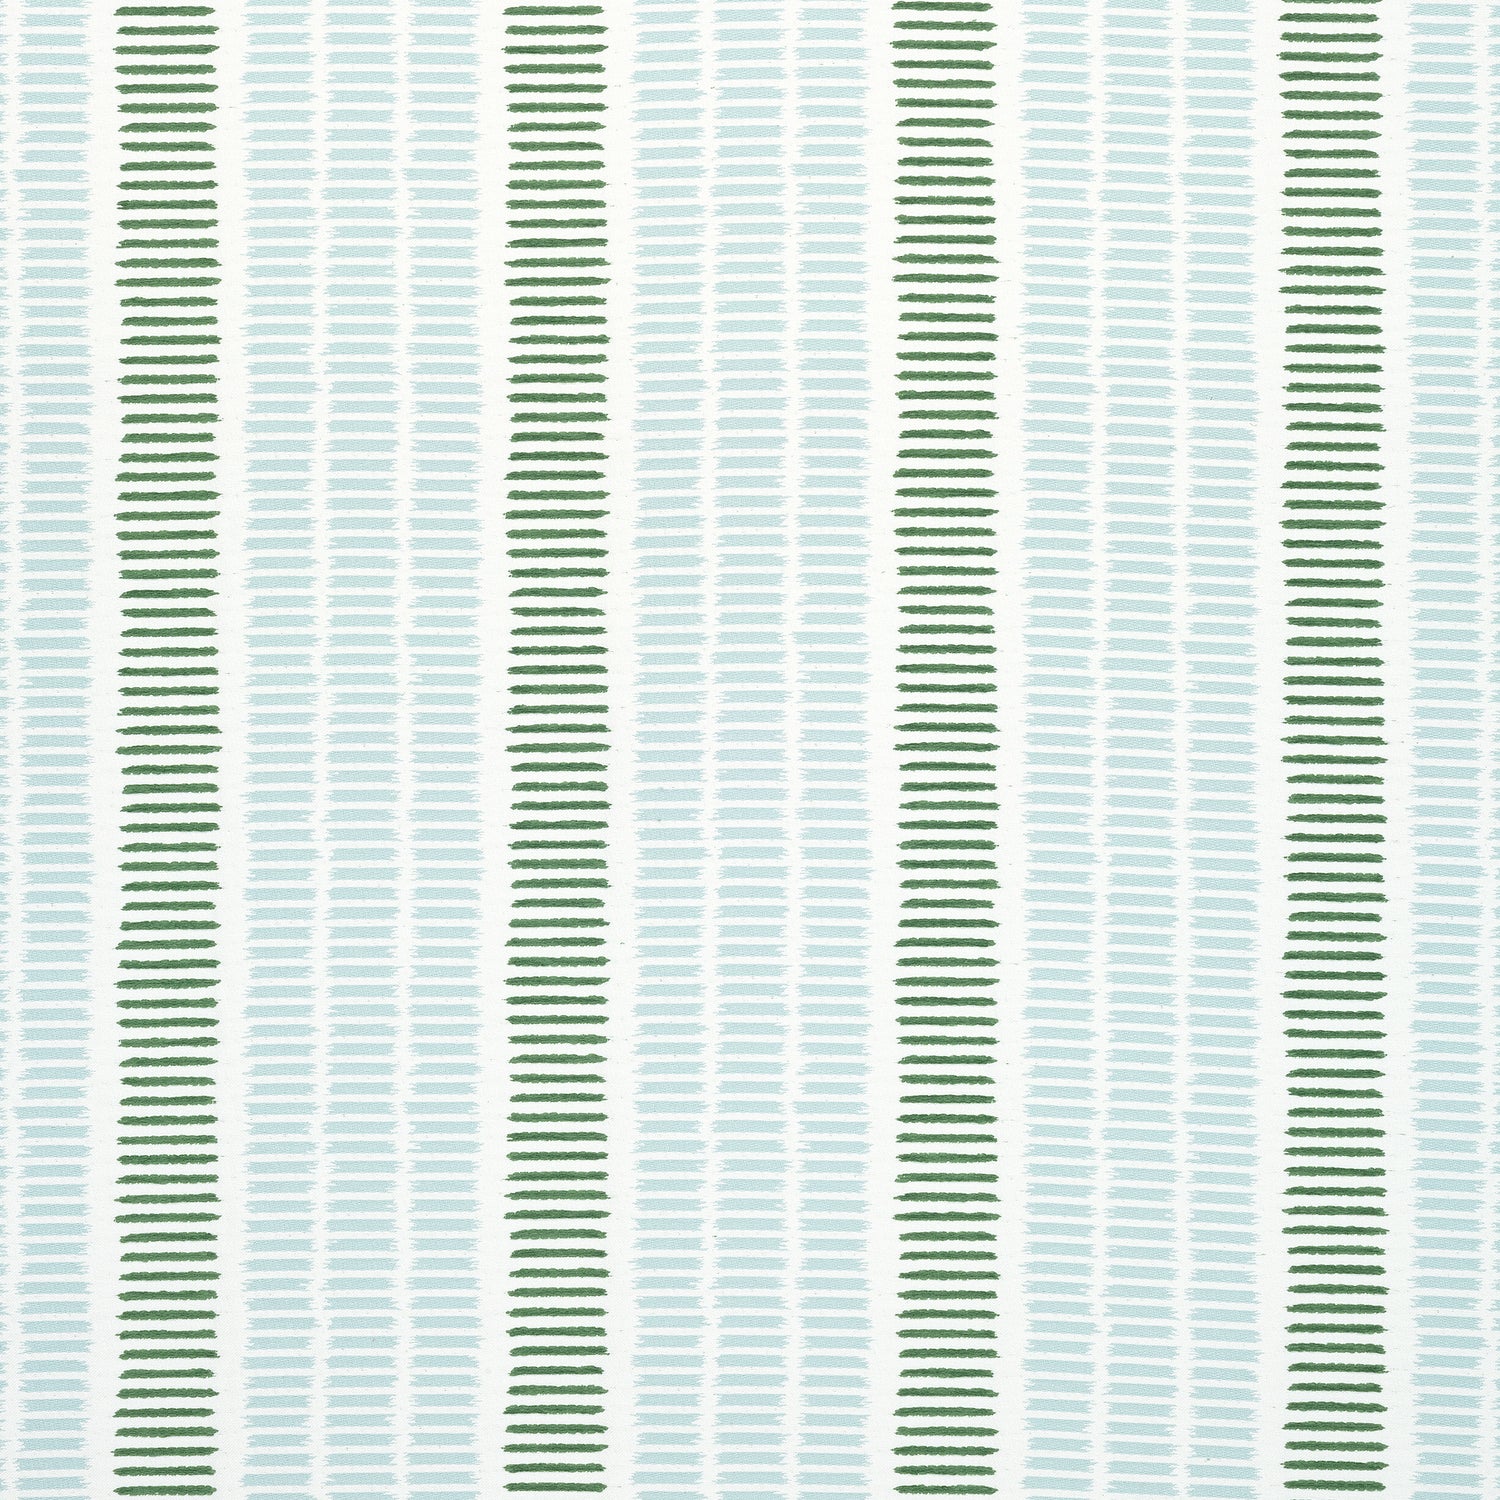 Topsail Stripe fabric in seafoam and kelly green color - pattern number W73517 - by Thibaut in the Landmark collection